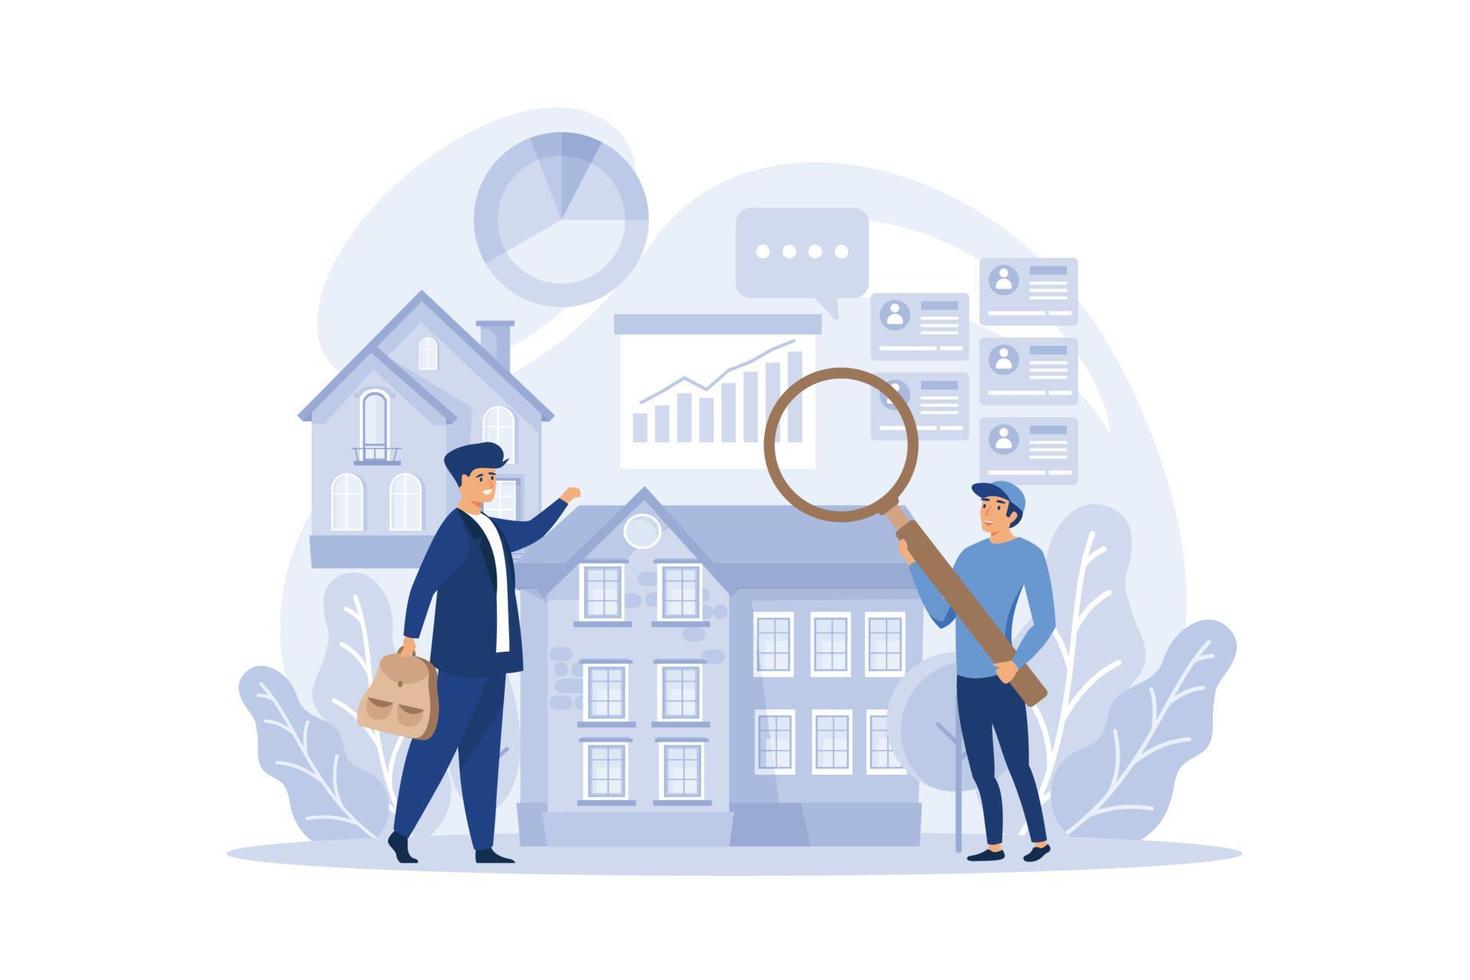 Qualified real estate agent or realtor concept. Realtor assistance and help in mortgage contract. Real estate searching, market analysis. flat design modern illustration vector